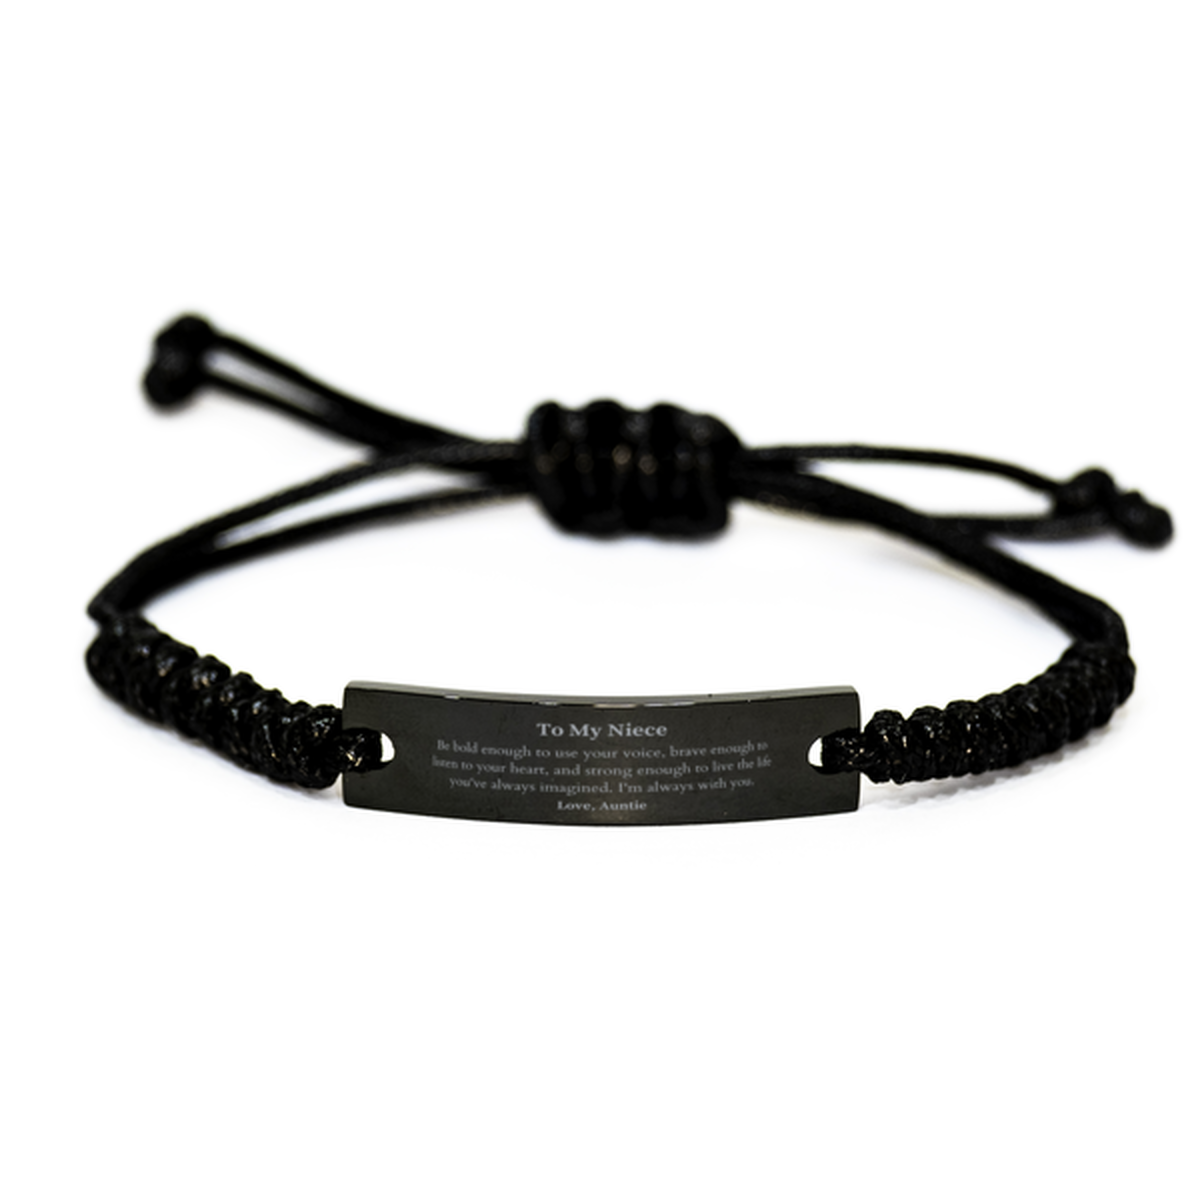 Keepsake Niece Black Rope Bracelet Gift Idea Graduation Christmas Birthday Niece from Auntie, Niece Be bold enough to use your voice, brave enough to listen to your heart. Love, Auntie